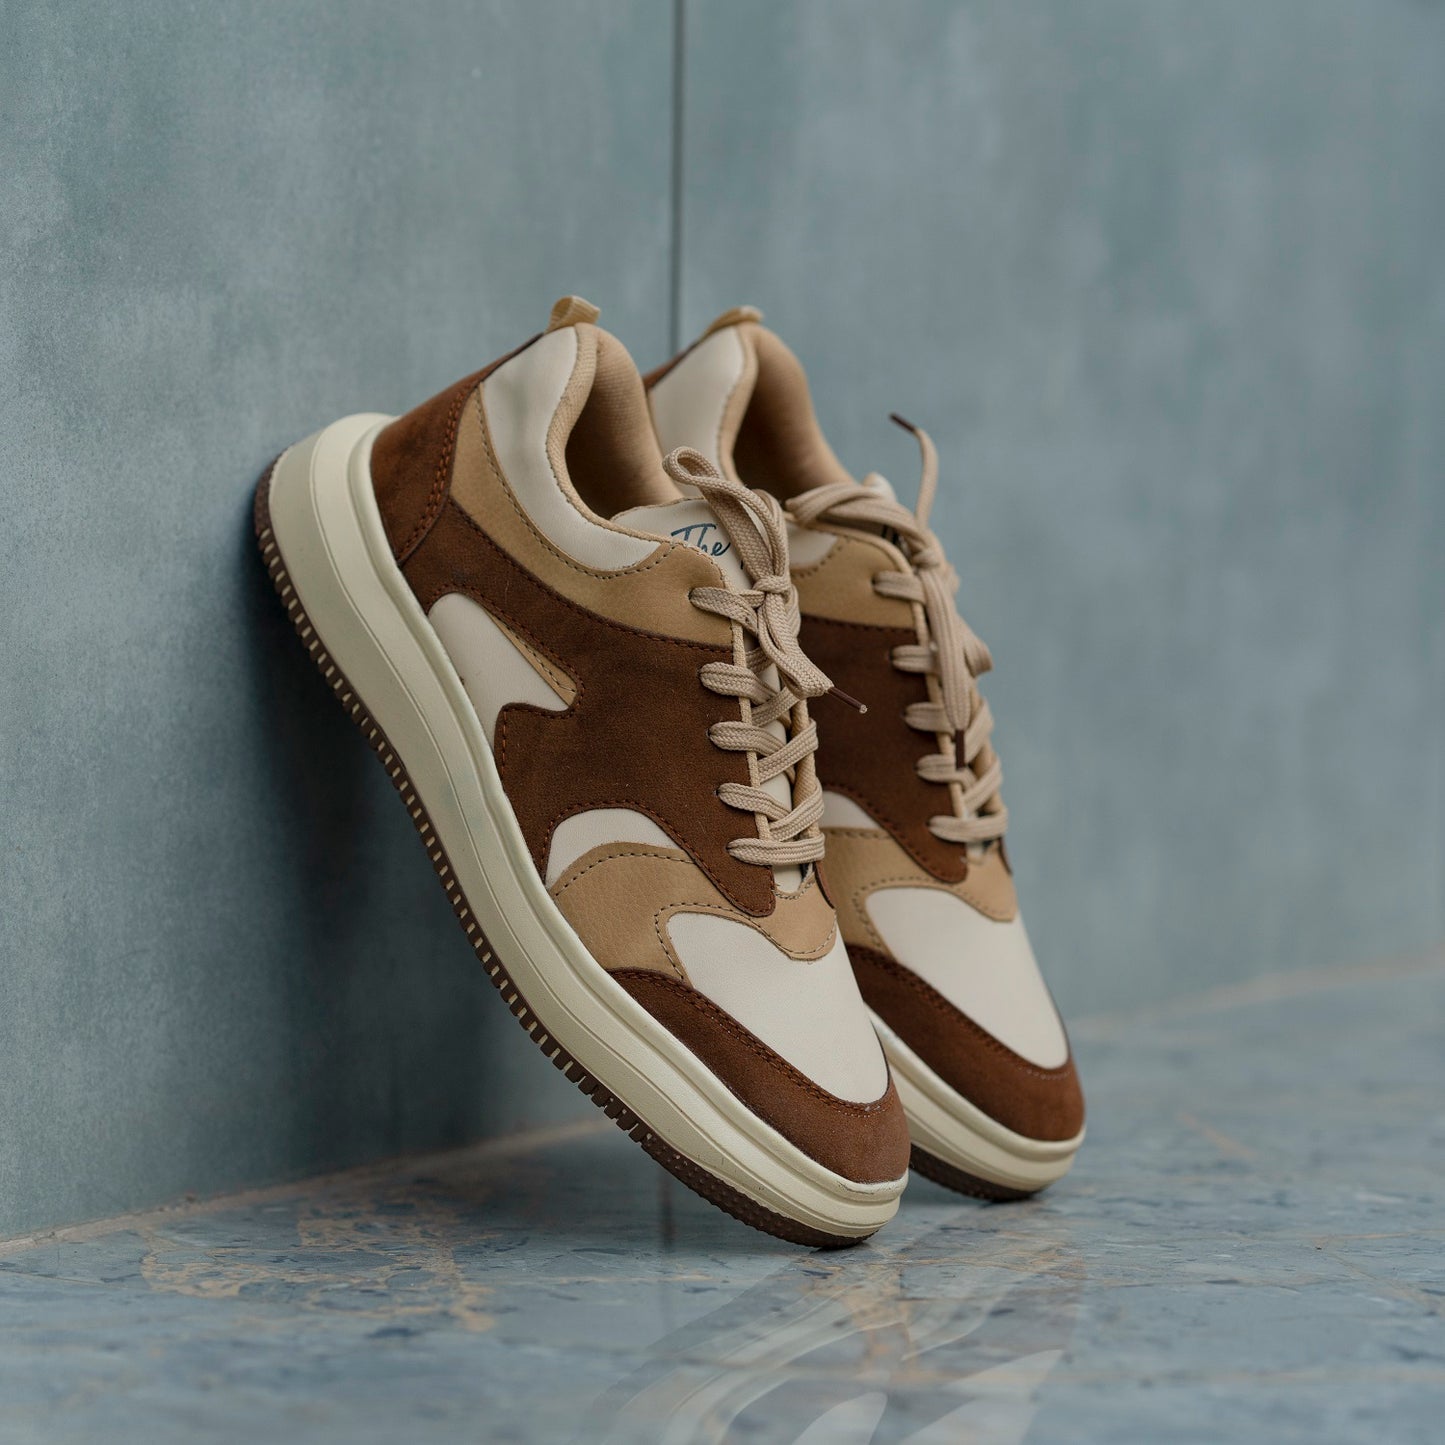 The Aurous Falcon Brown Sneakers